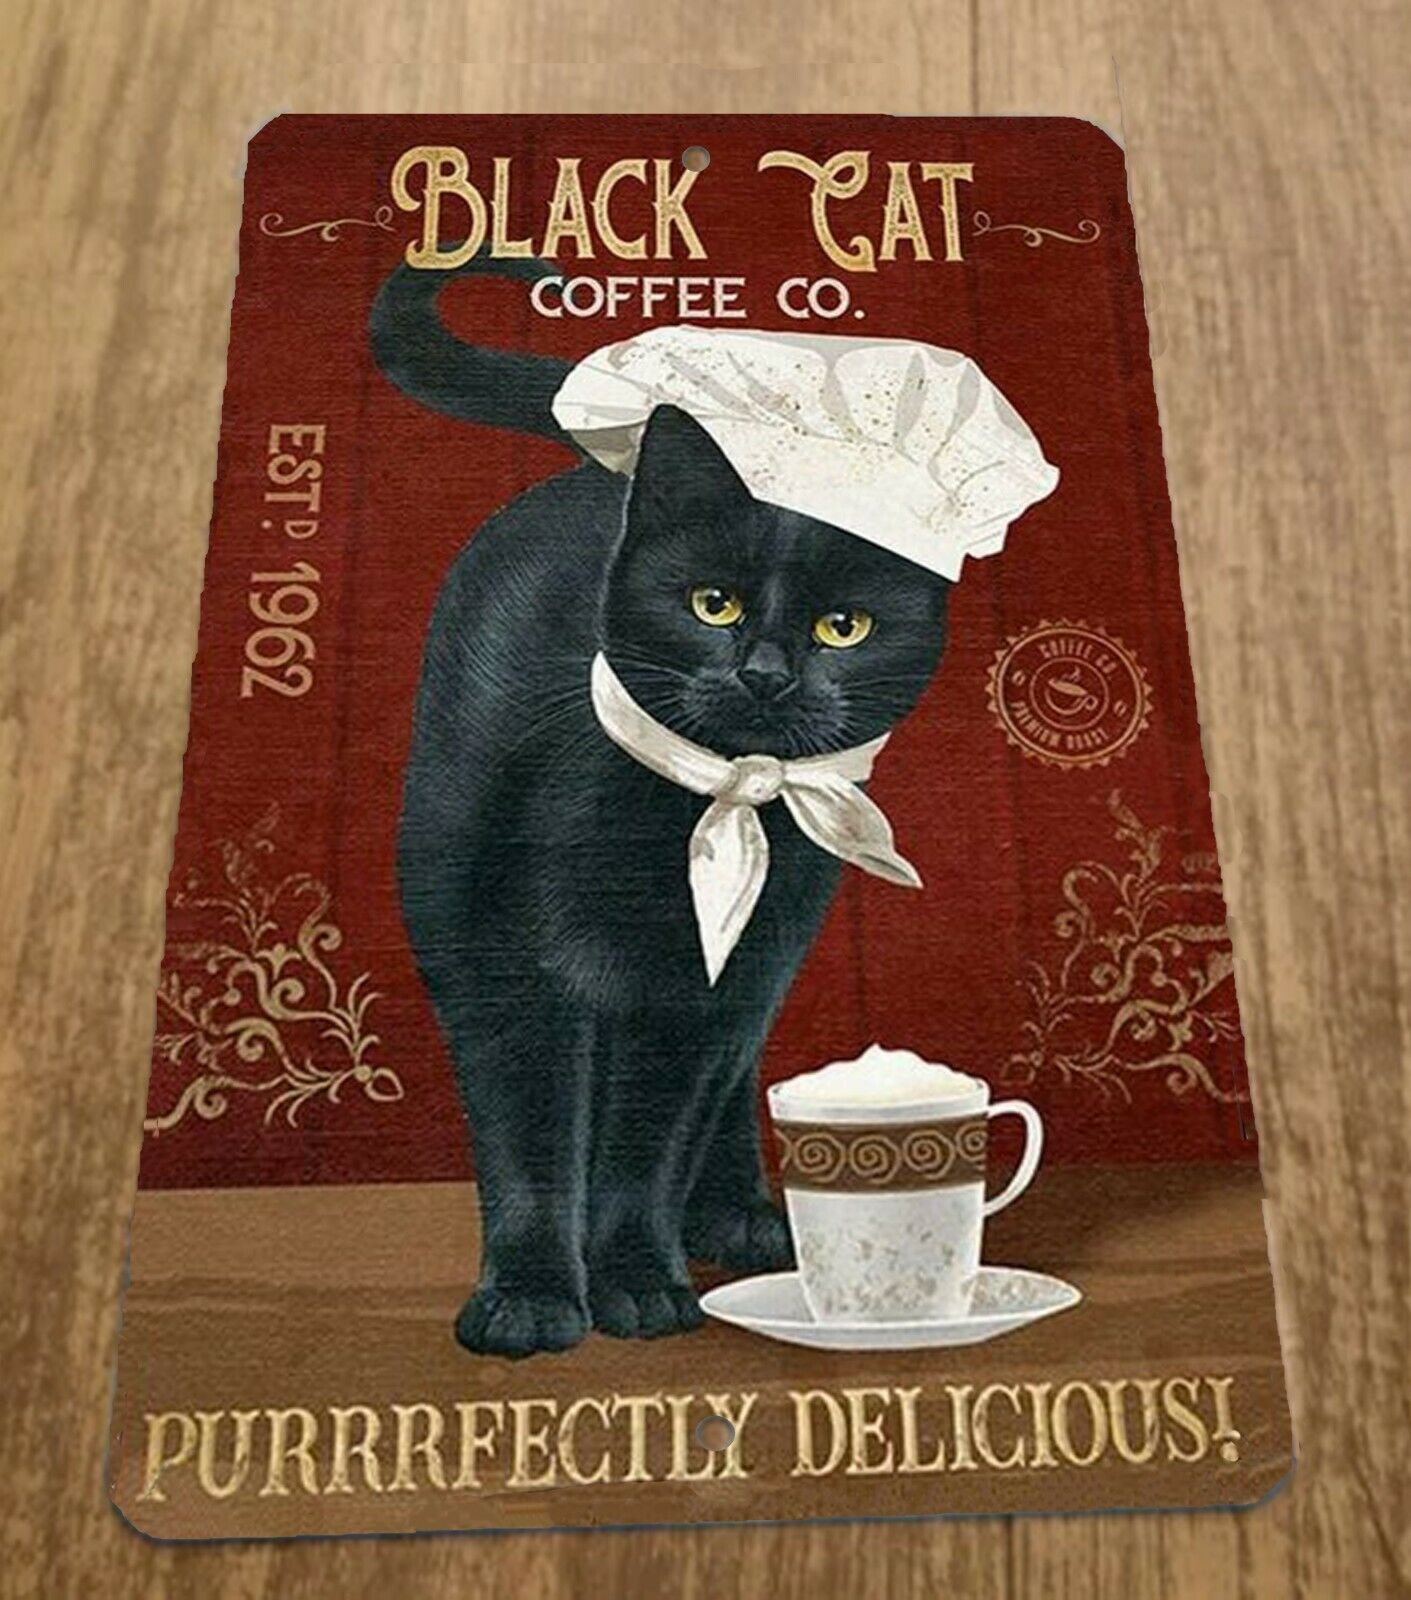 Black Cat Coffee Purrrfectly Delicious 8x12 Metal Wall Animal Sign